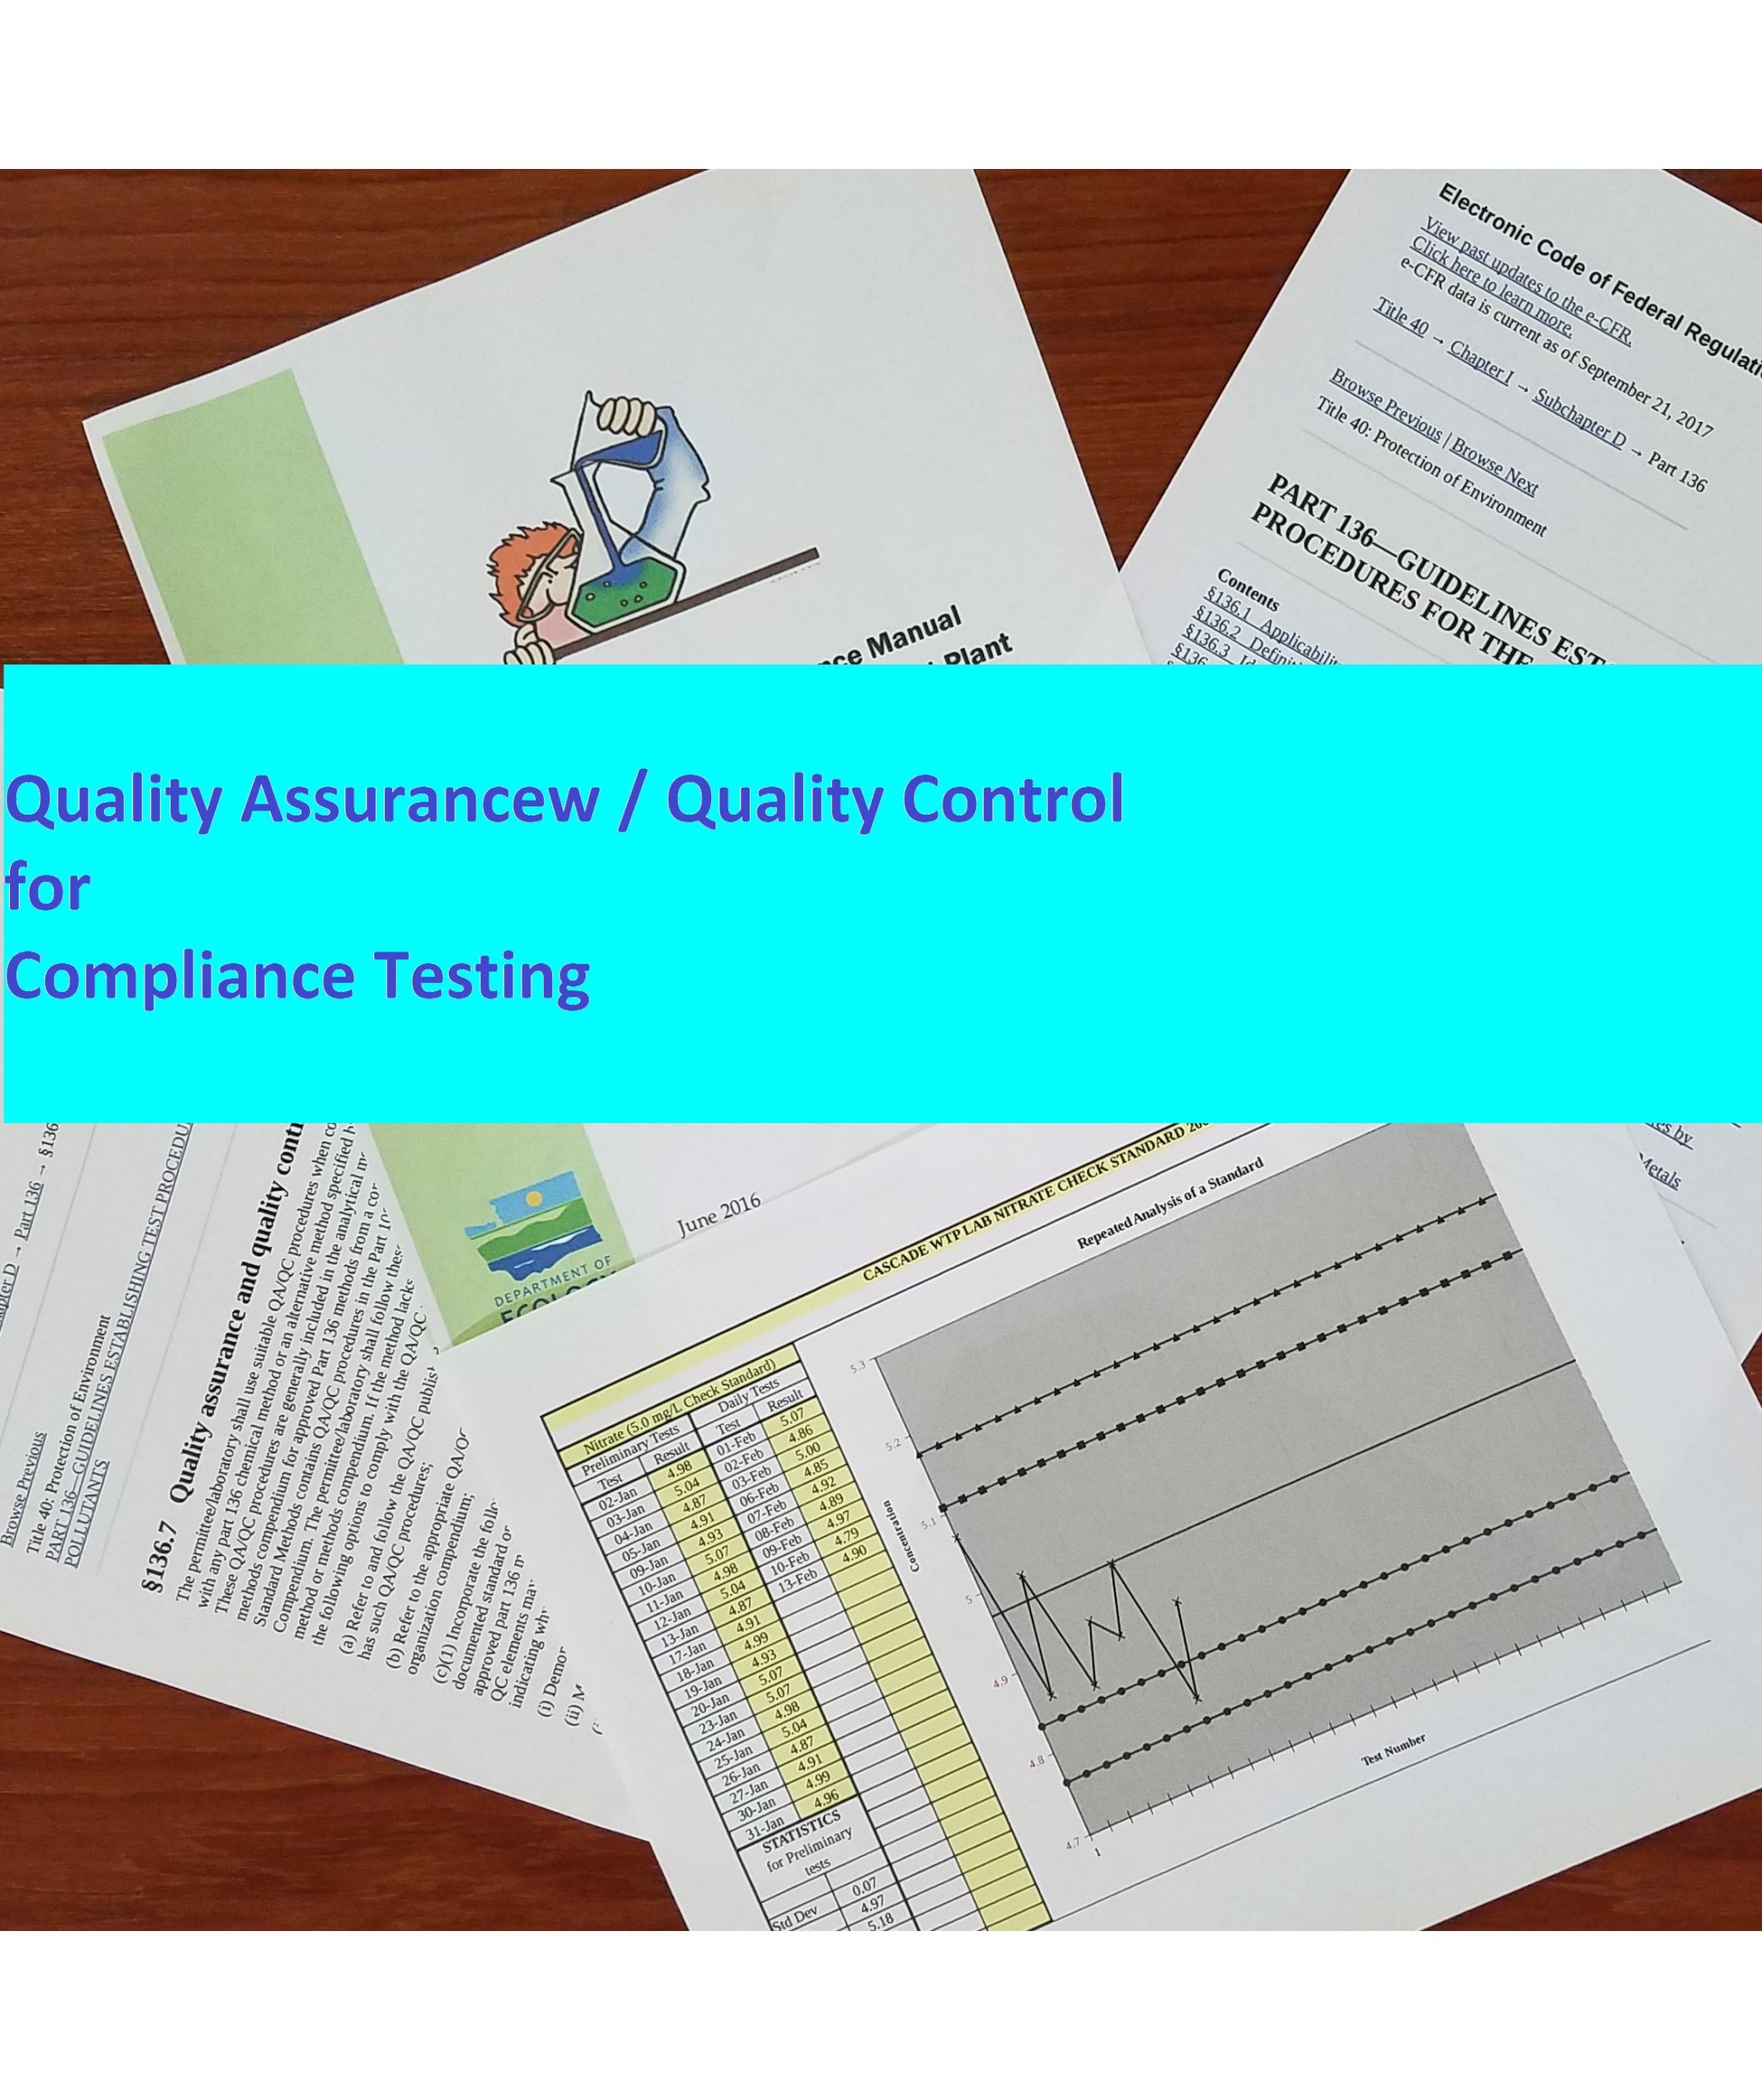 Quality Assurance / Quality Control (QAQC) for Compliance Testing & Water & Wastewater Laboratories